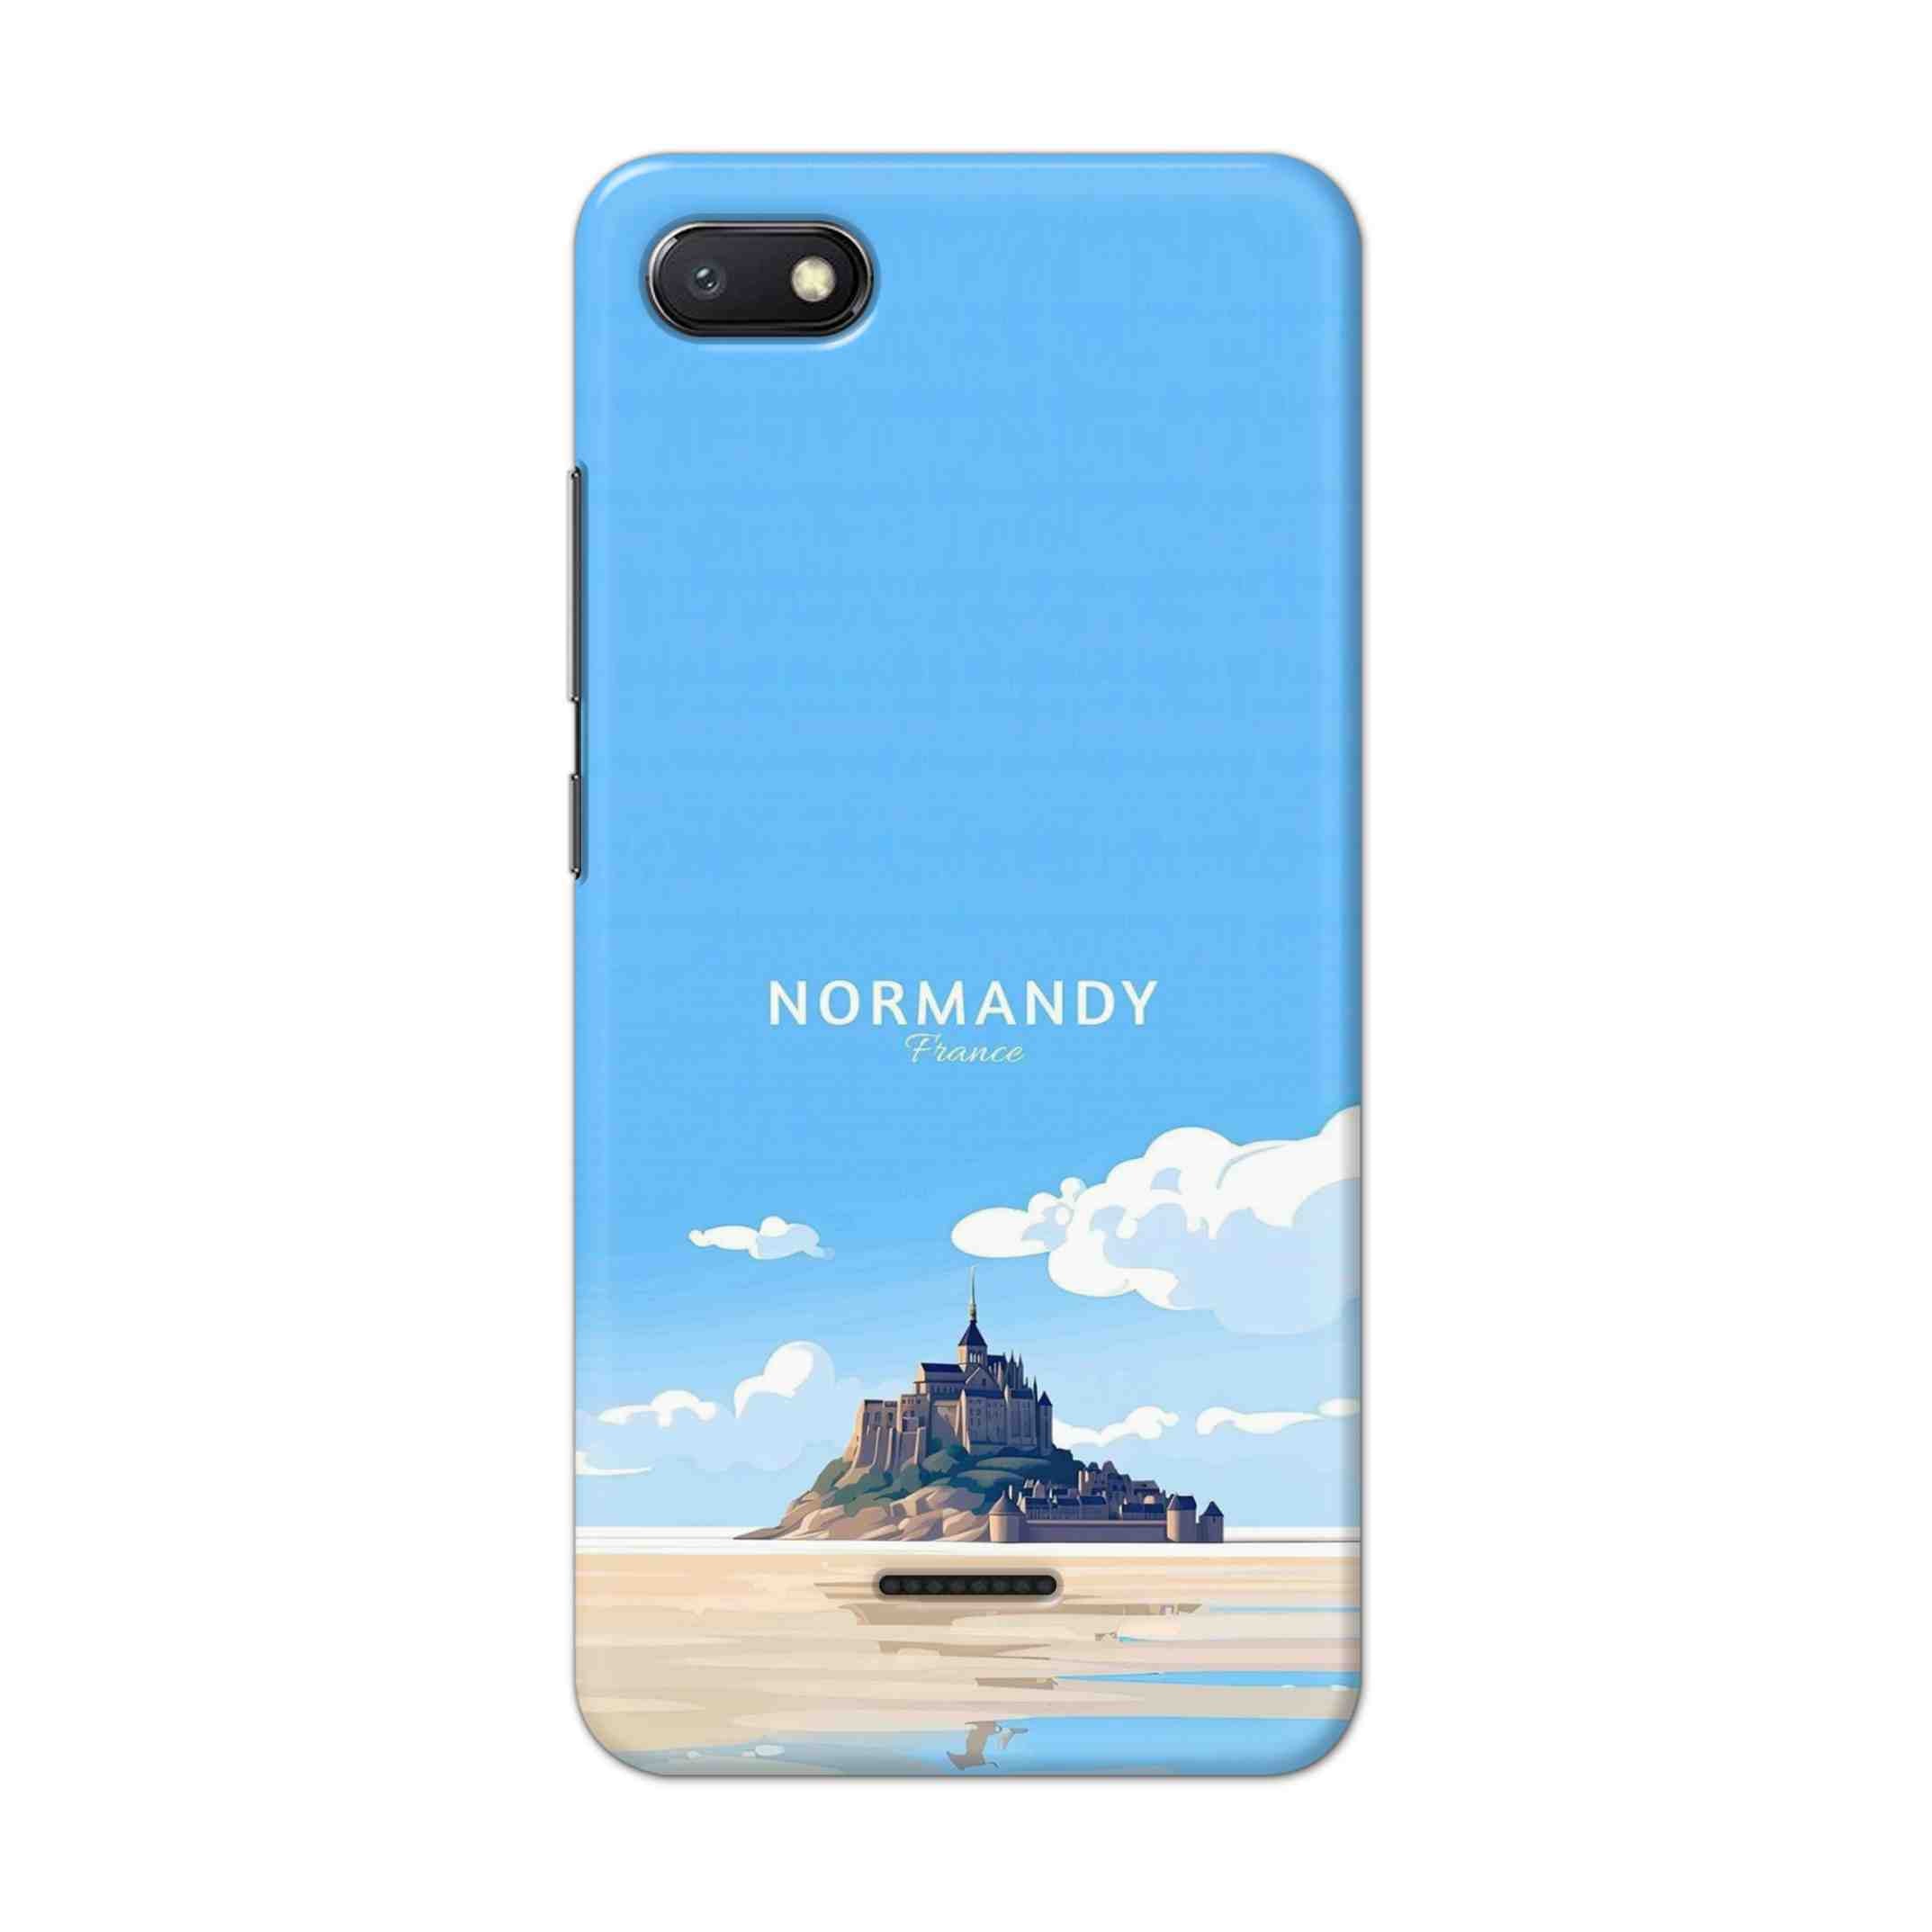 Buy Normandy Hard Back Mobile Phone Case/Cover For Xiaomi Redmi 6A Online